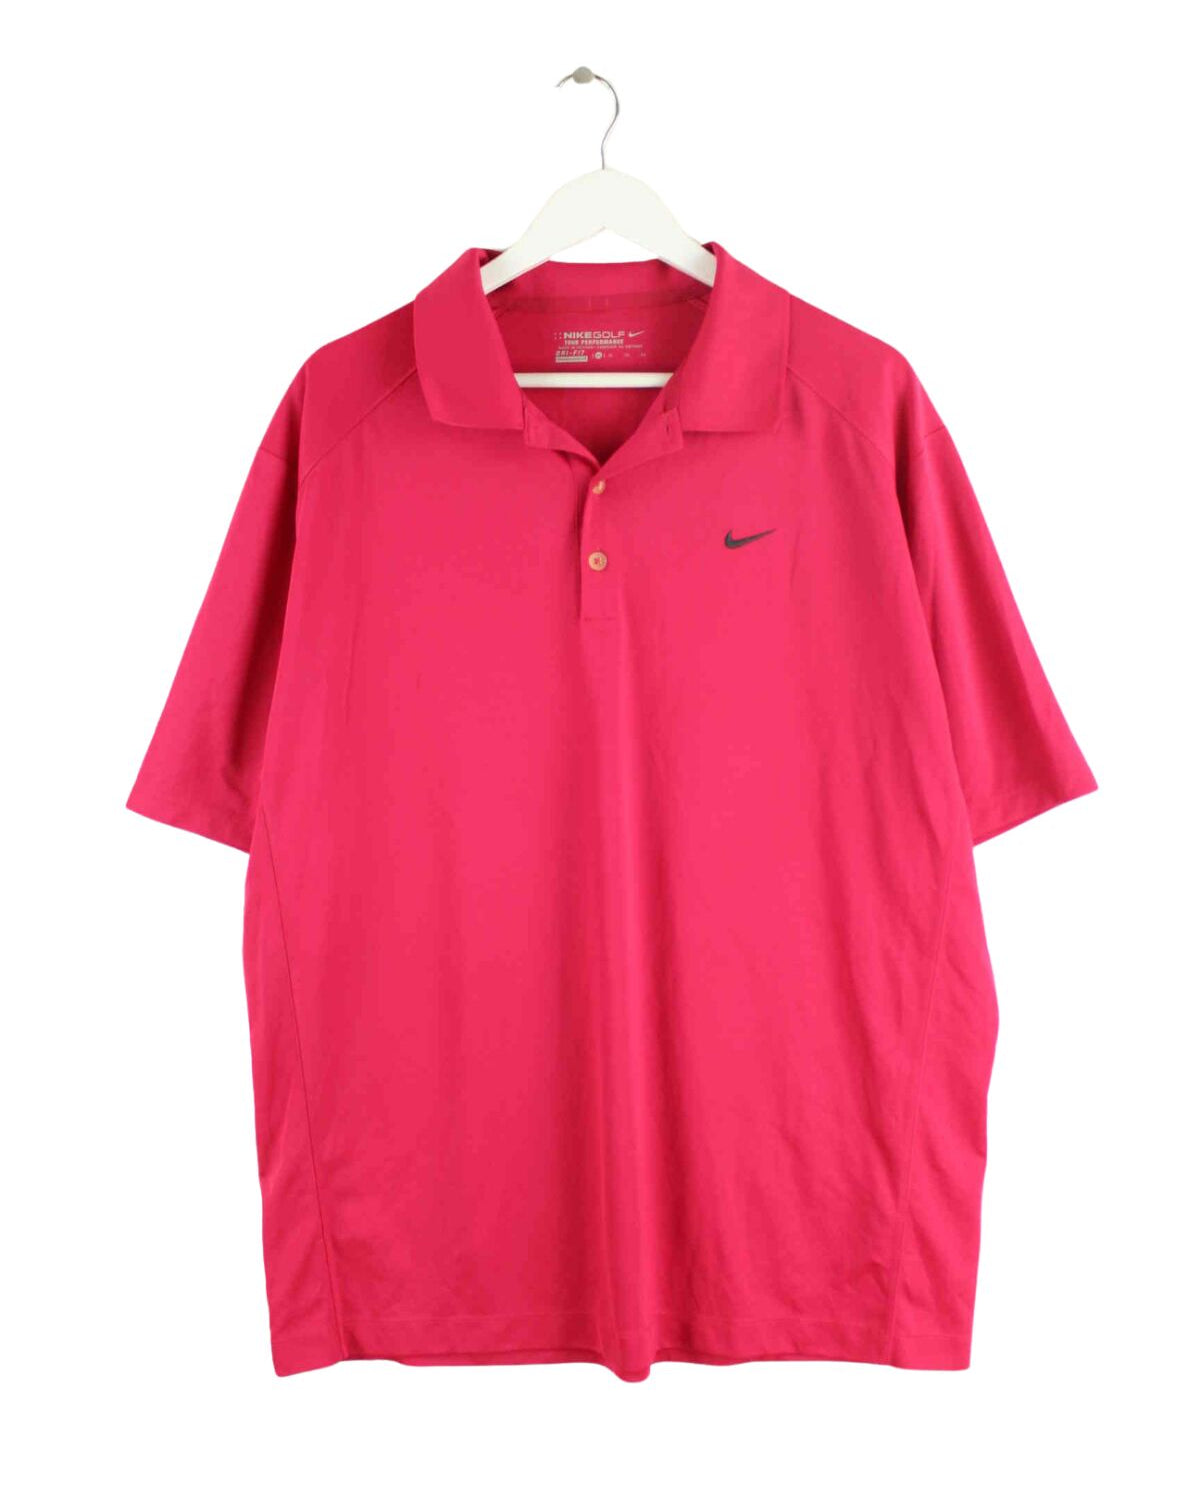 Nike Golf Swoosh Polo Pink XL (front image)